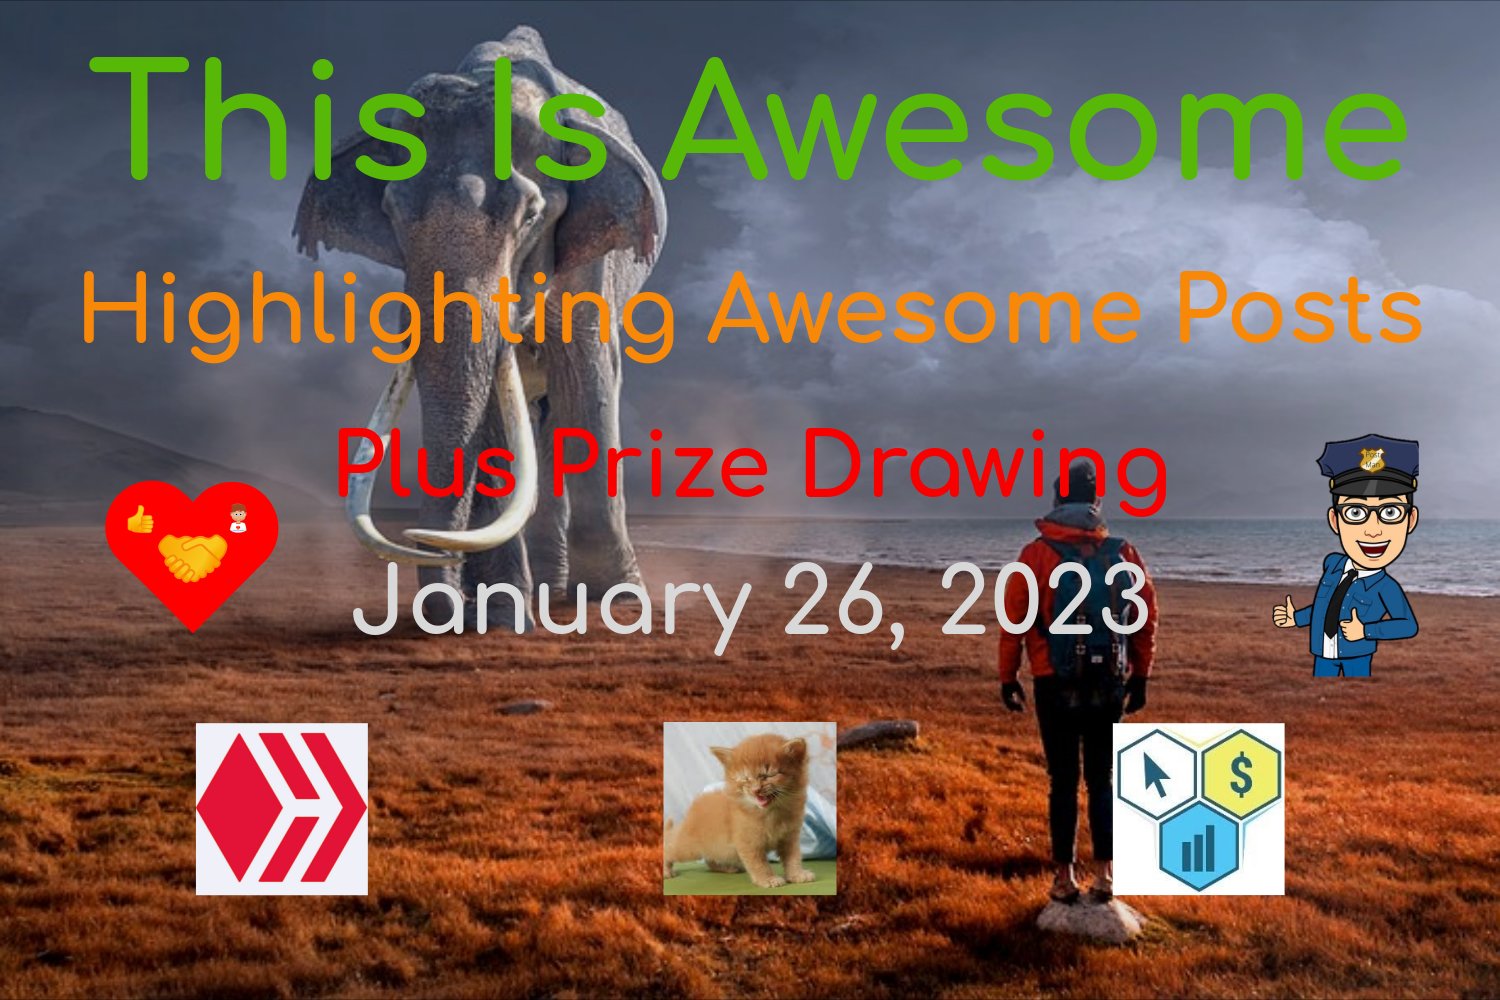 @thisisawesome/this-is-awesome-highlighting-awesome-posts-plus-prize-drawing-january-26-2023